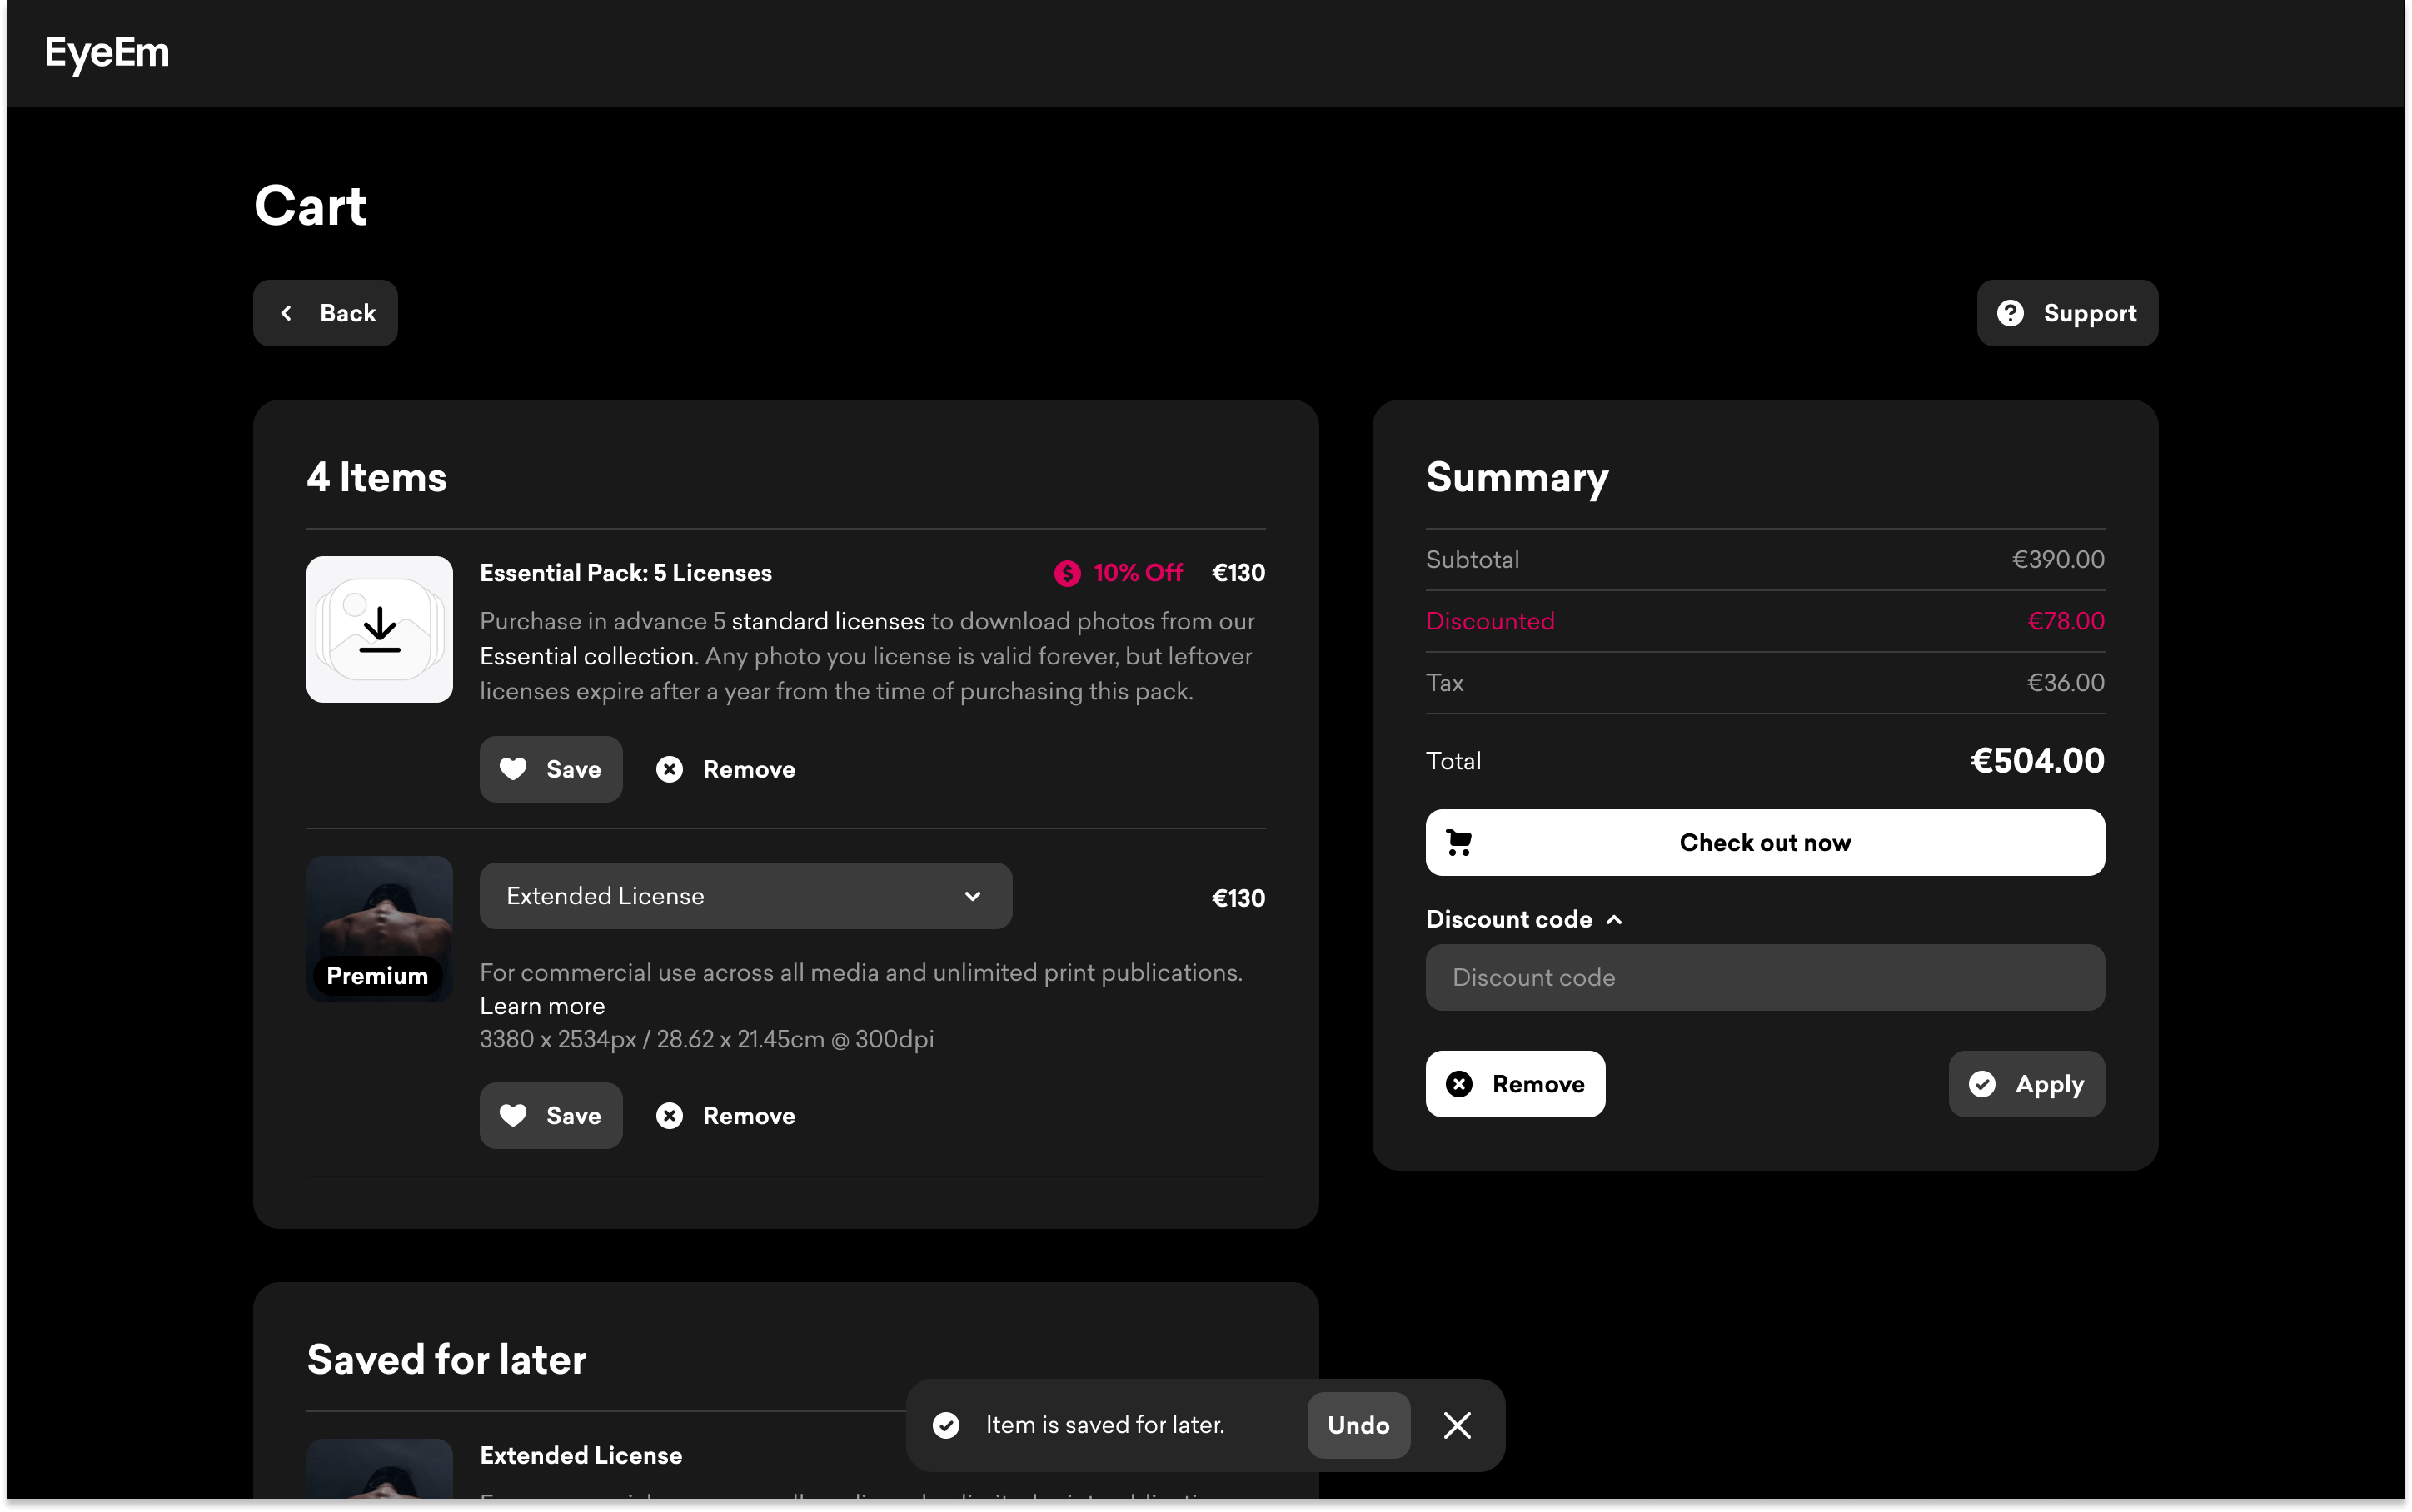 A mock design of EyeEm's cart page using the previous dark theme version.